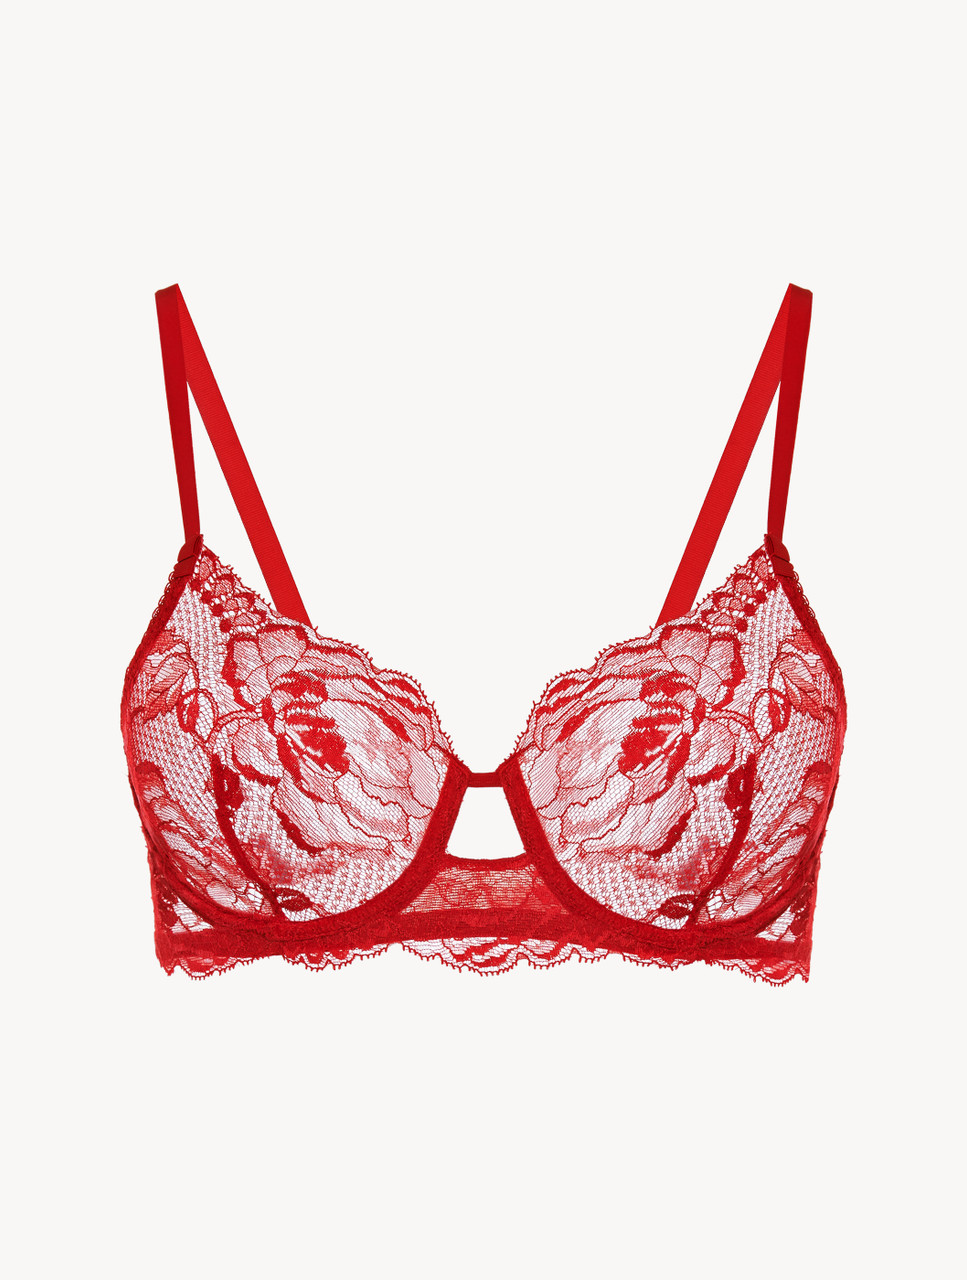 Photo of Red Lacy Bra on Silky Fabric